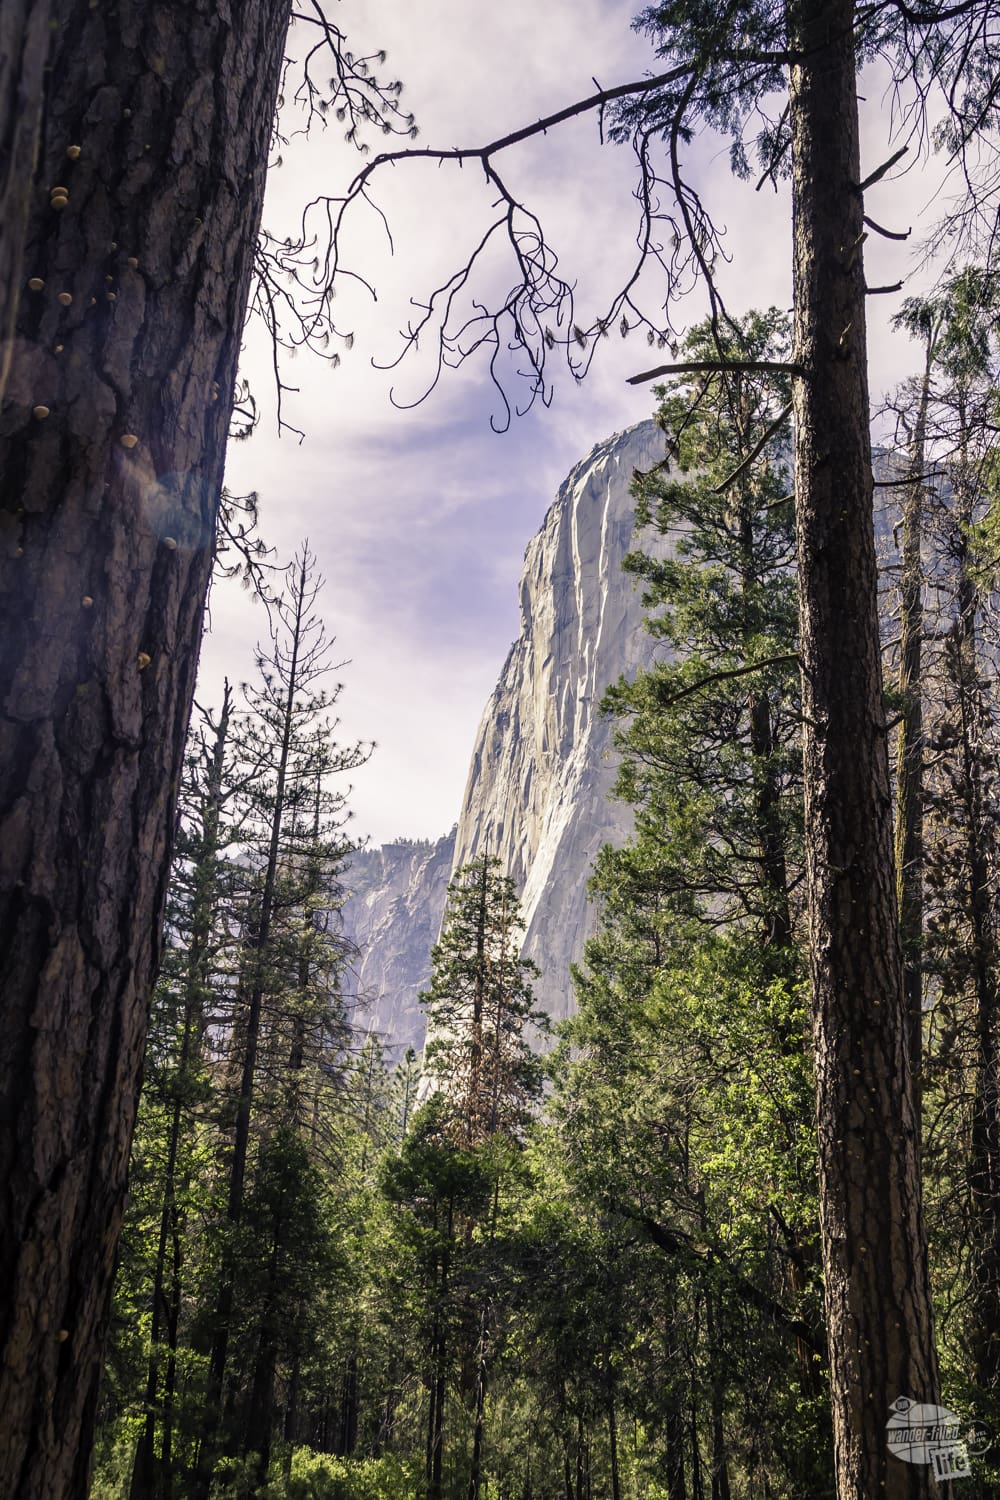 El Capitan is the jewel of the east end of the Yosemite Valley Loop Trail.